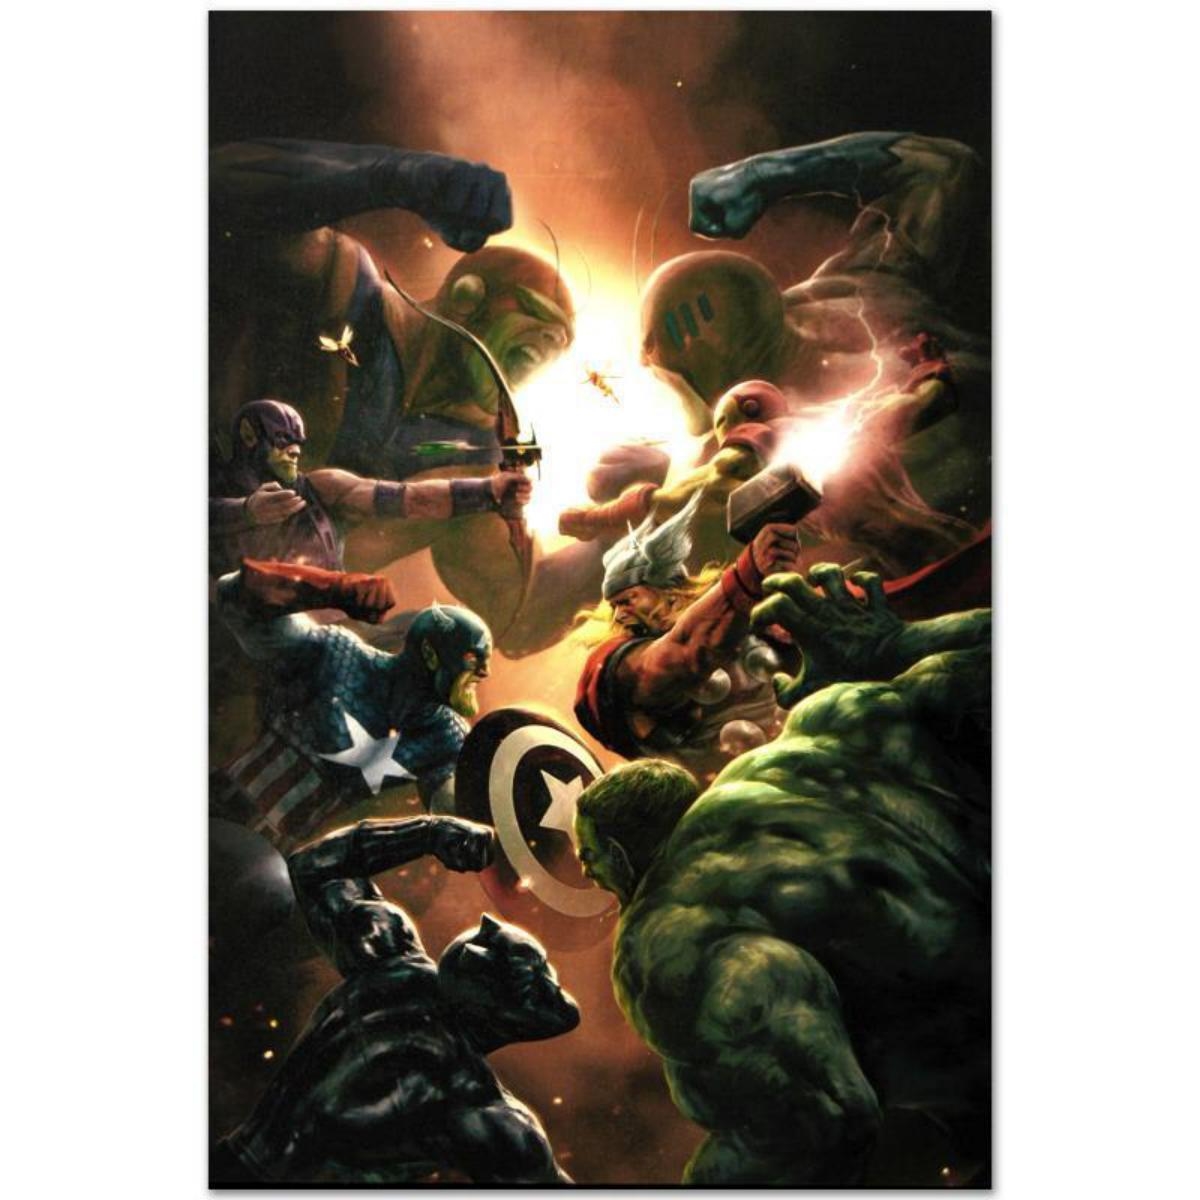 Artwork by Aleksi Briclot, New Avengers #43, Made of giclee on stretched canvas